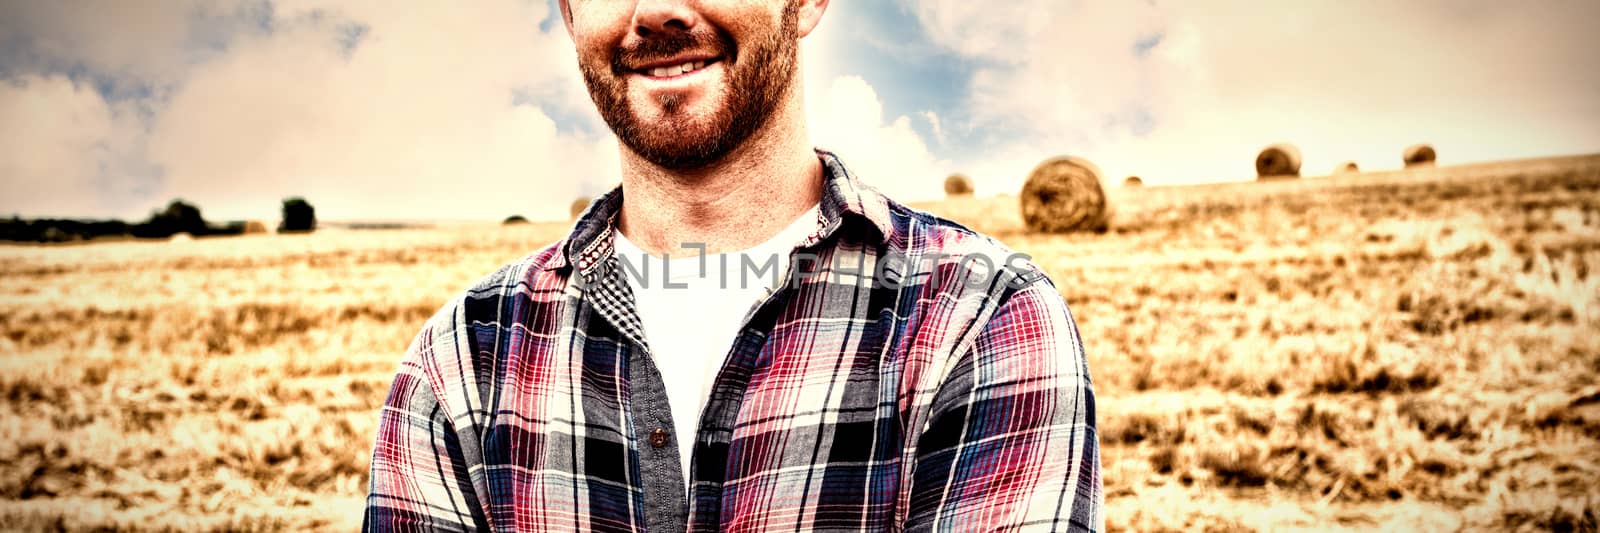 Farmer standing with arms crossed in field on sunny day